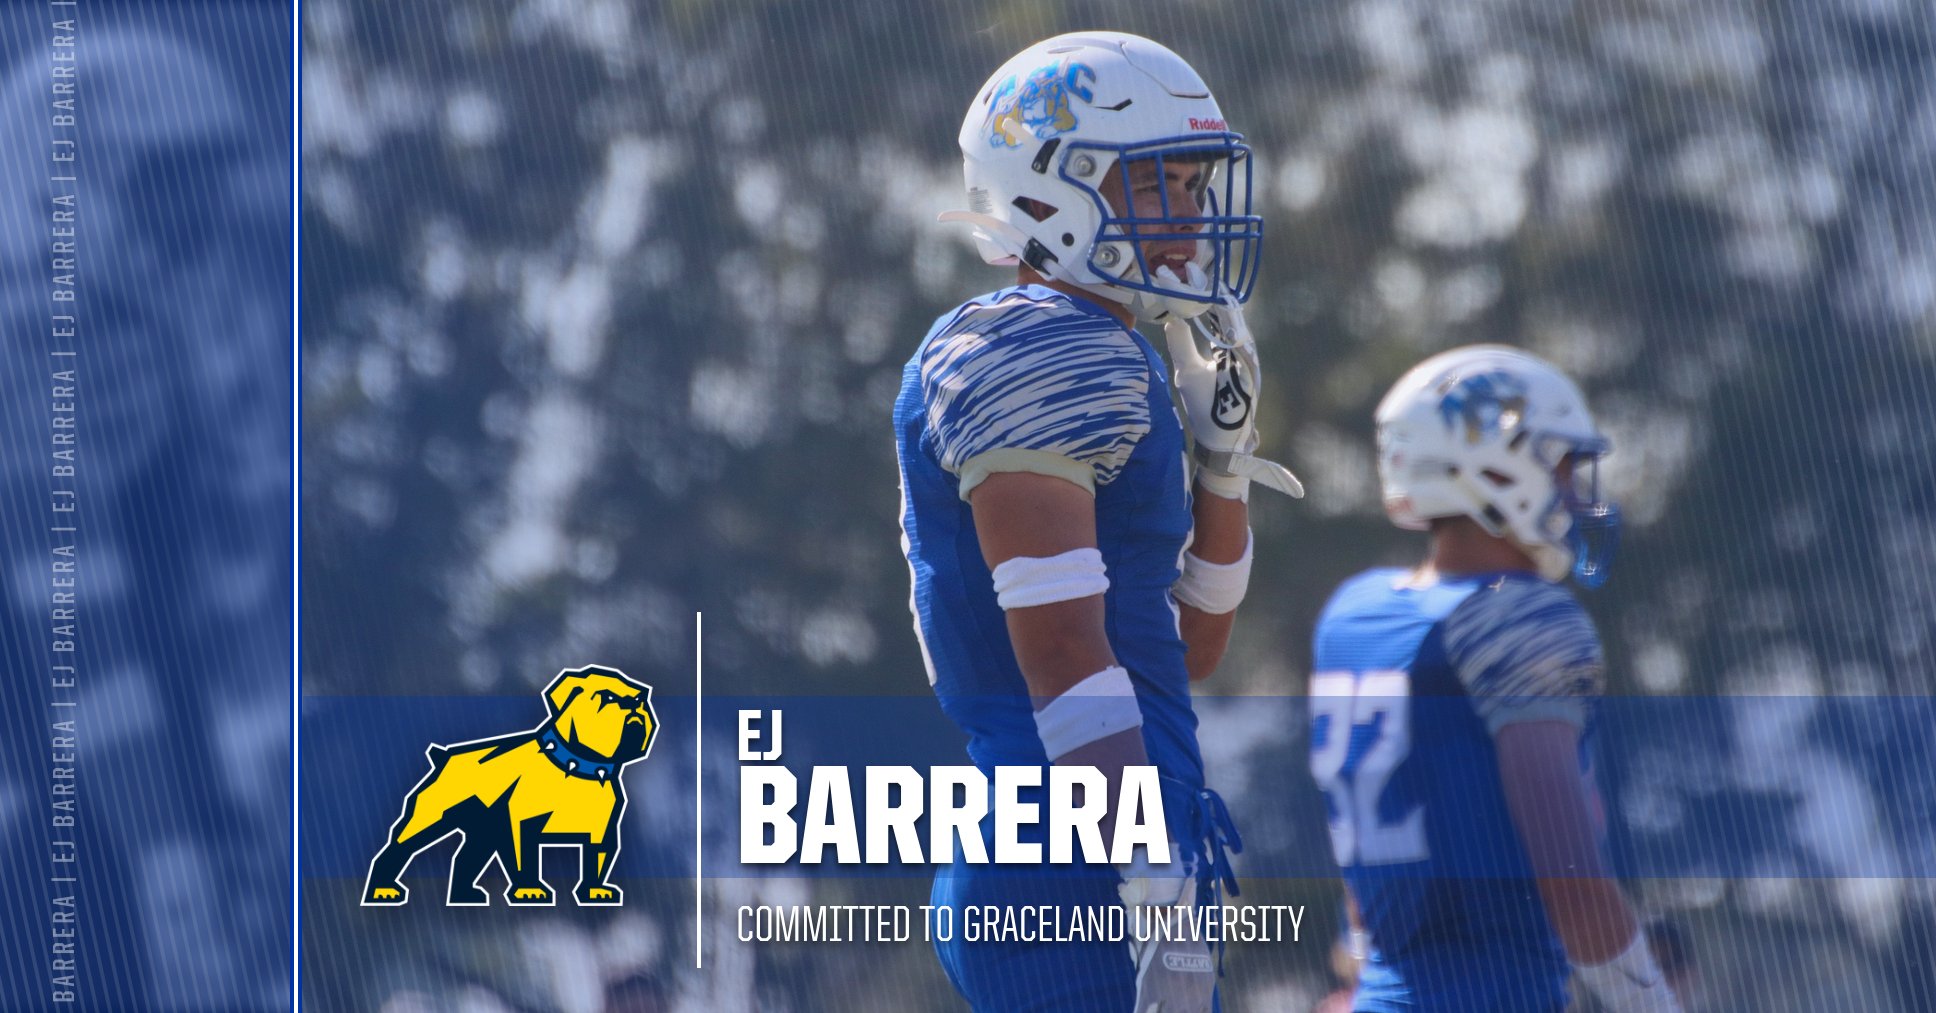 Football's EJ Barrera Committed to Graceland University